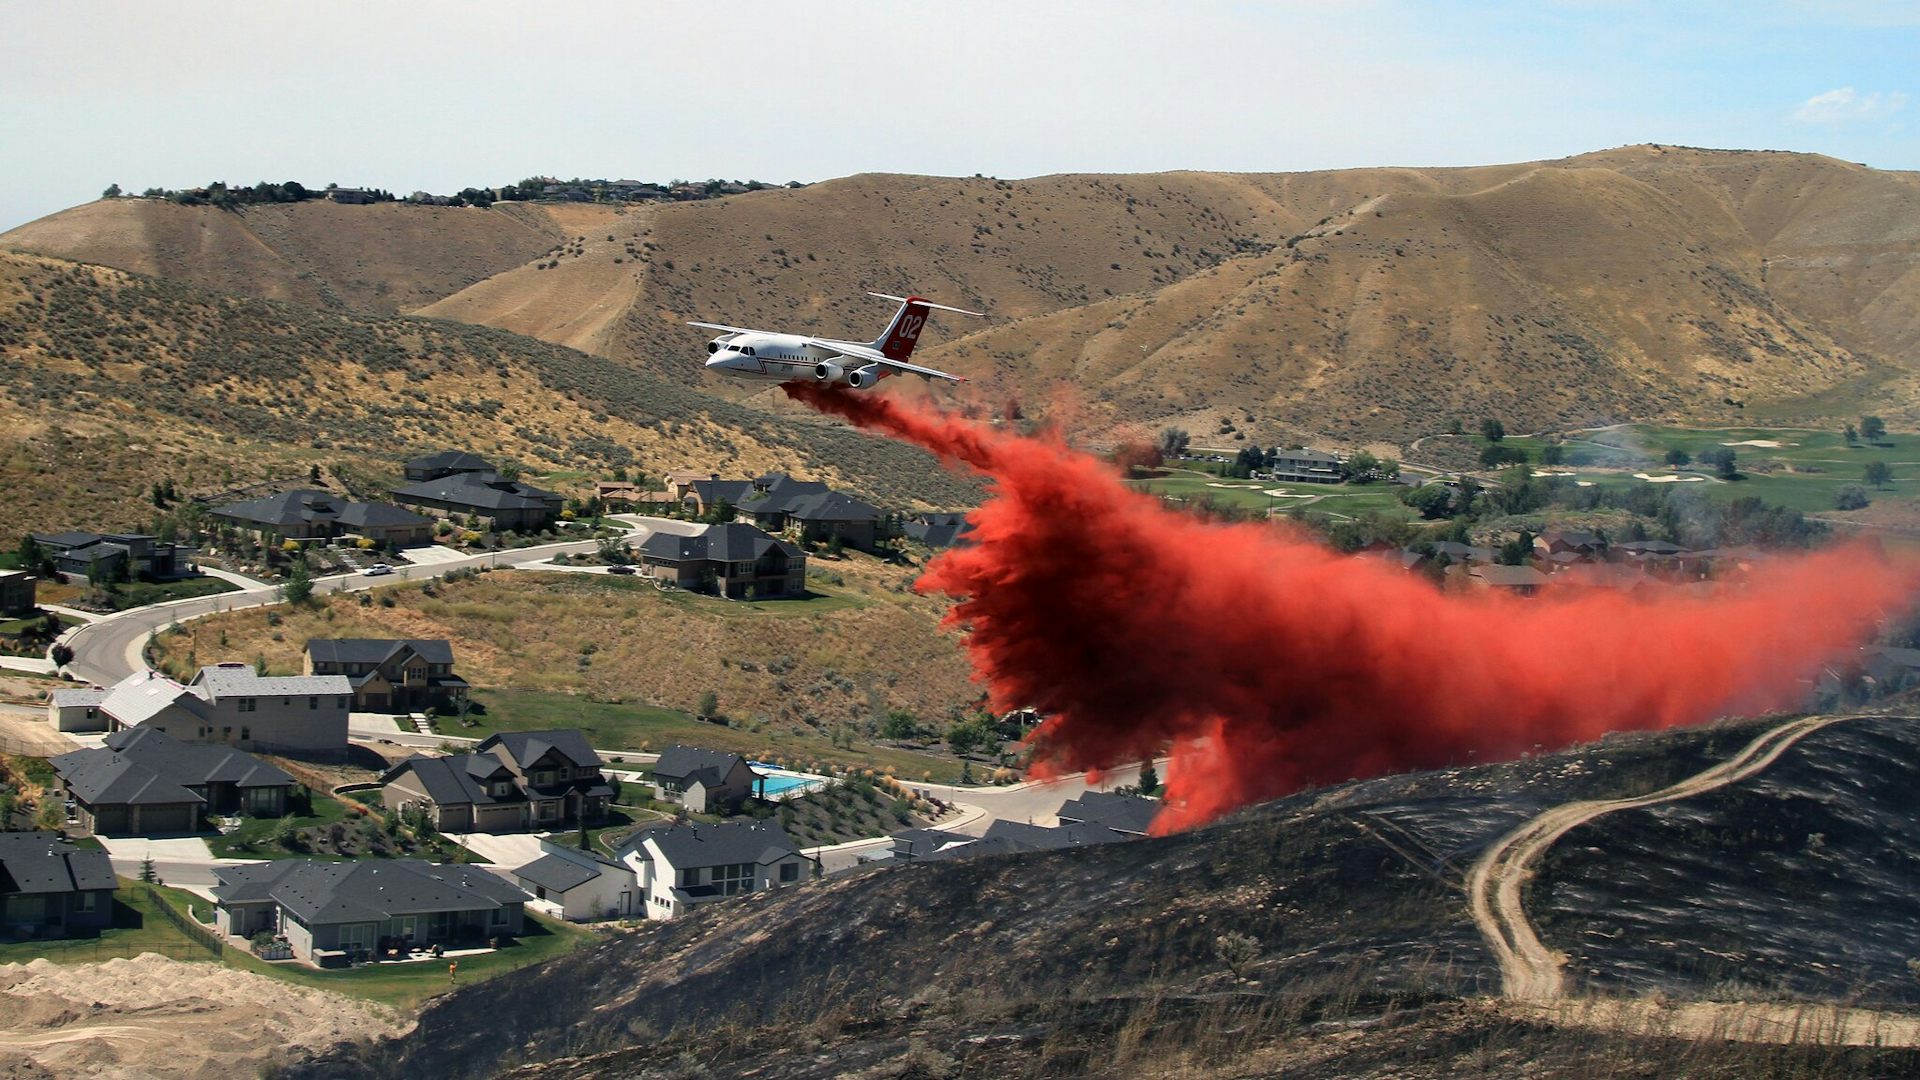 Humans Ignite Almost Every Wildfire That Threatens Homes